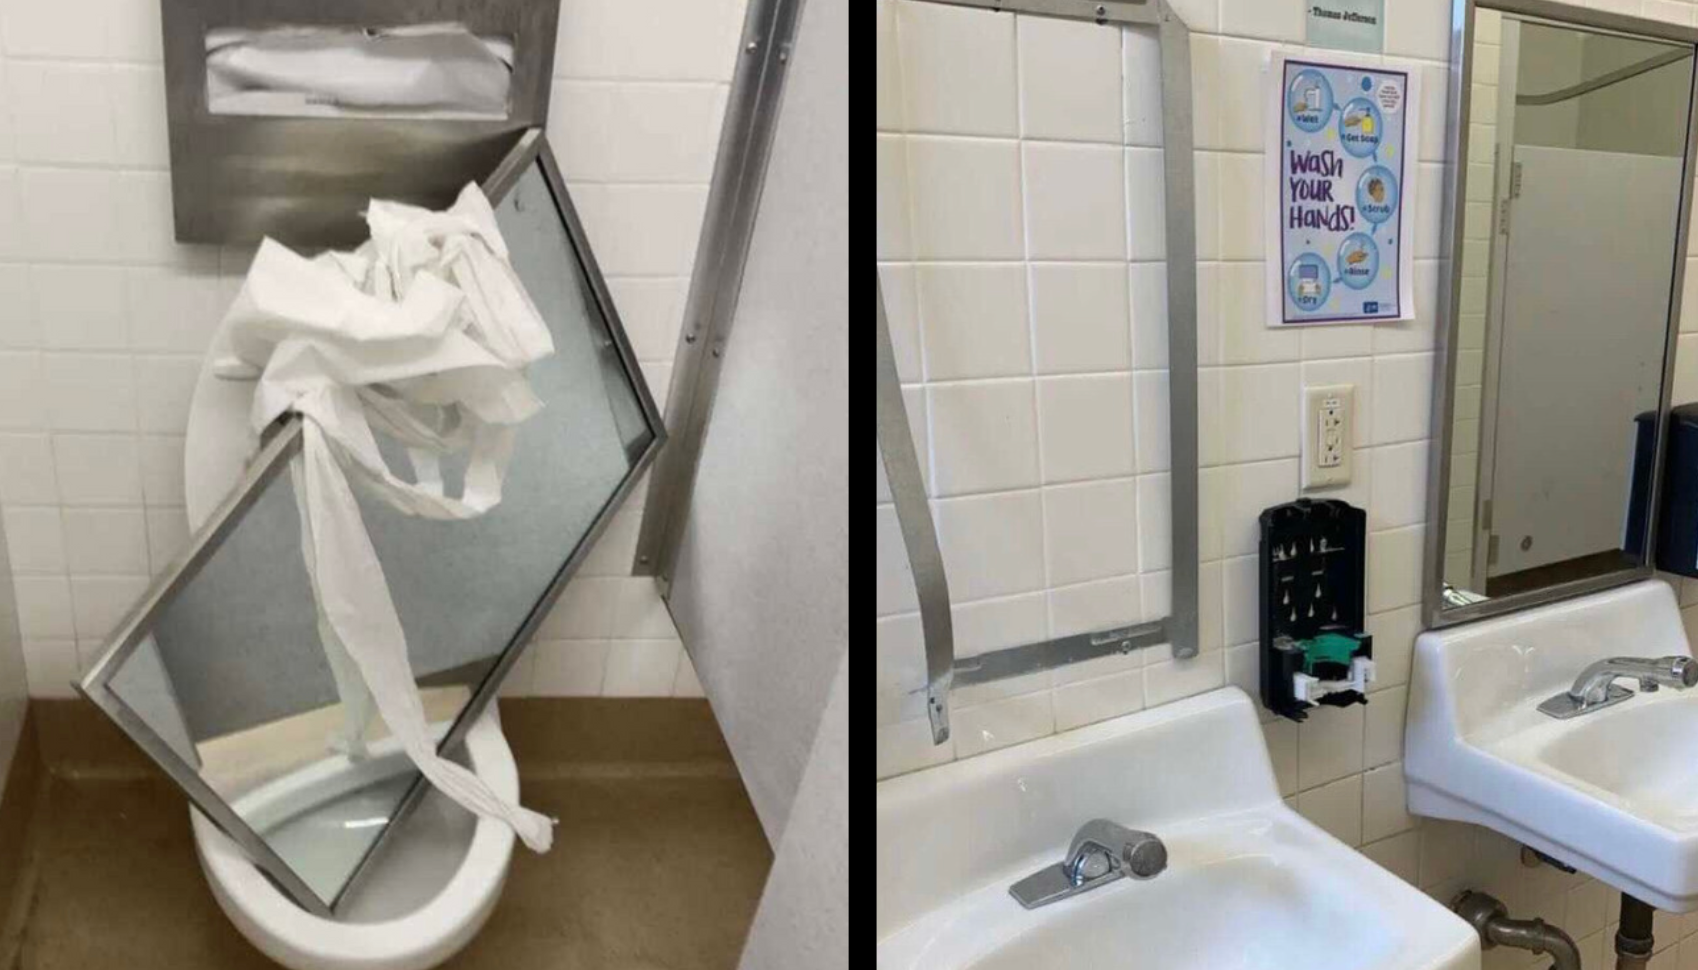 Paly bathroom mirrors were vandalized and removed this week. Photos by Nikhil Majeti